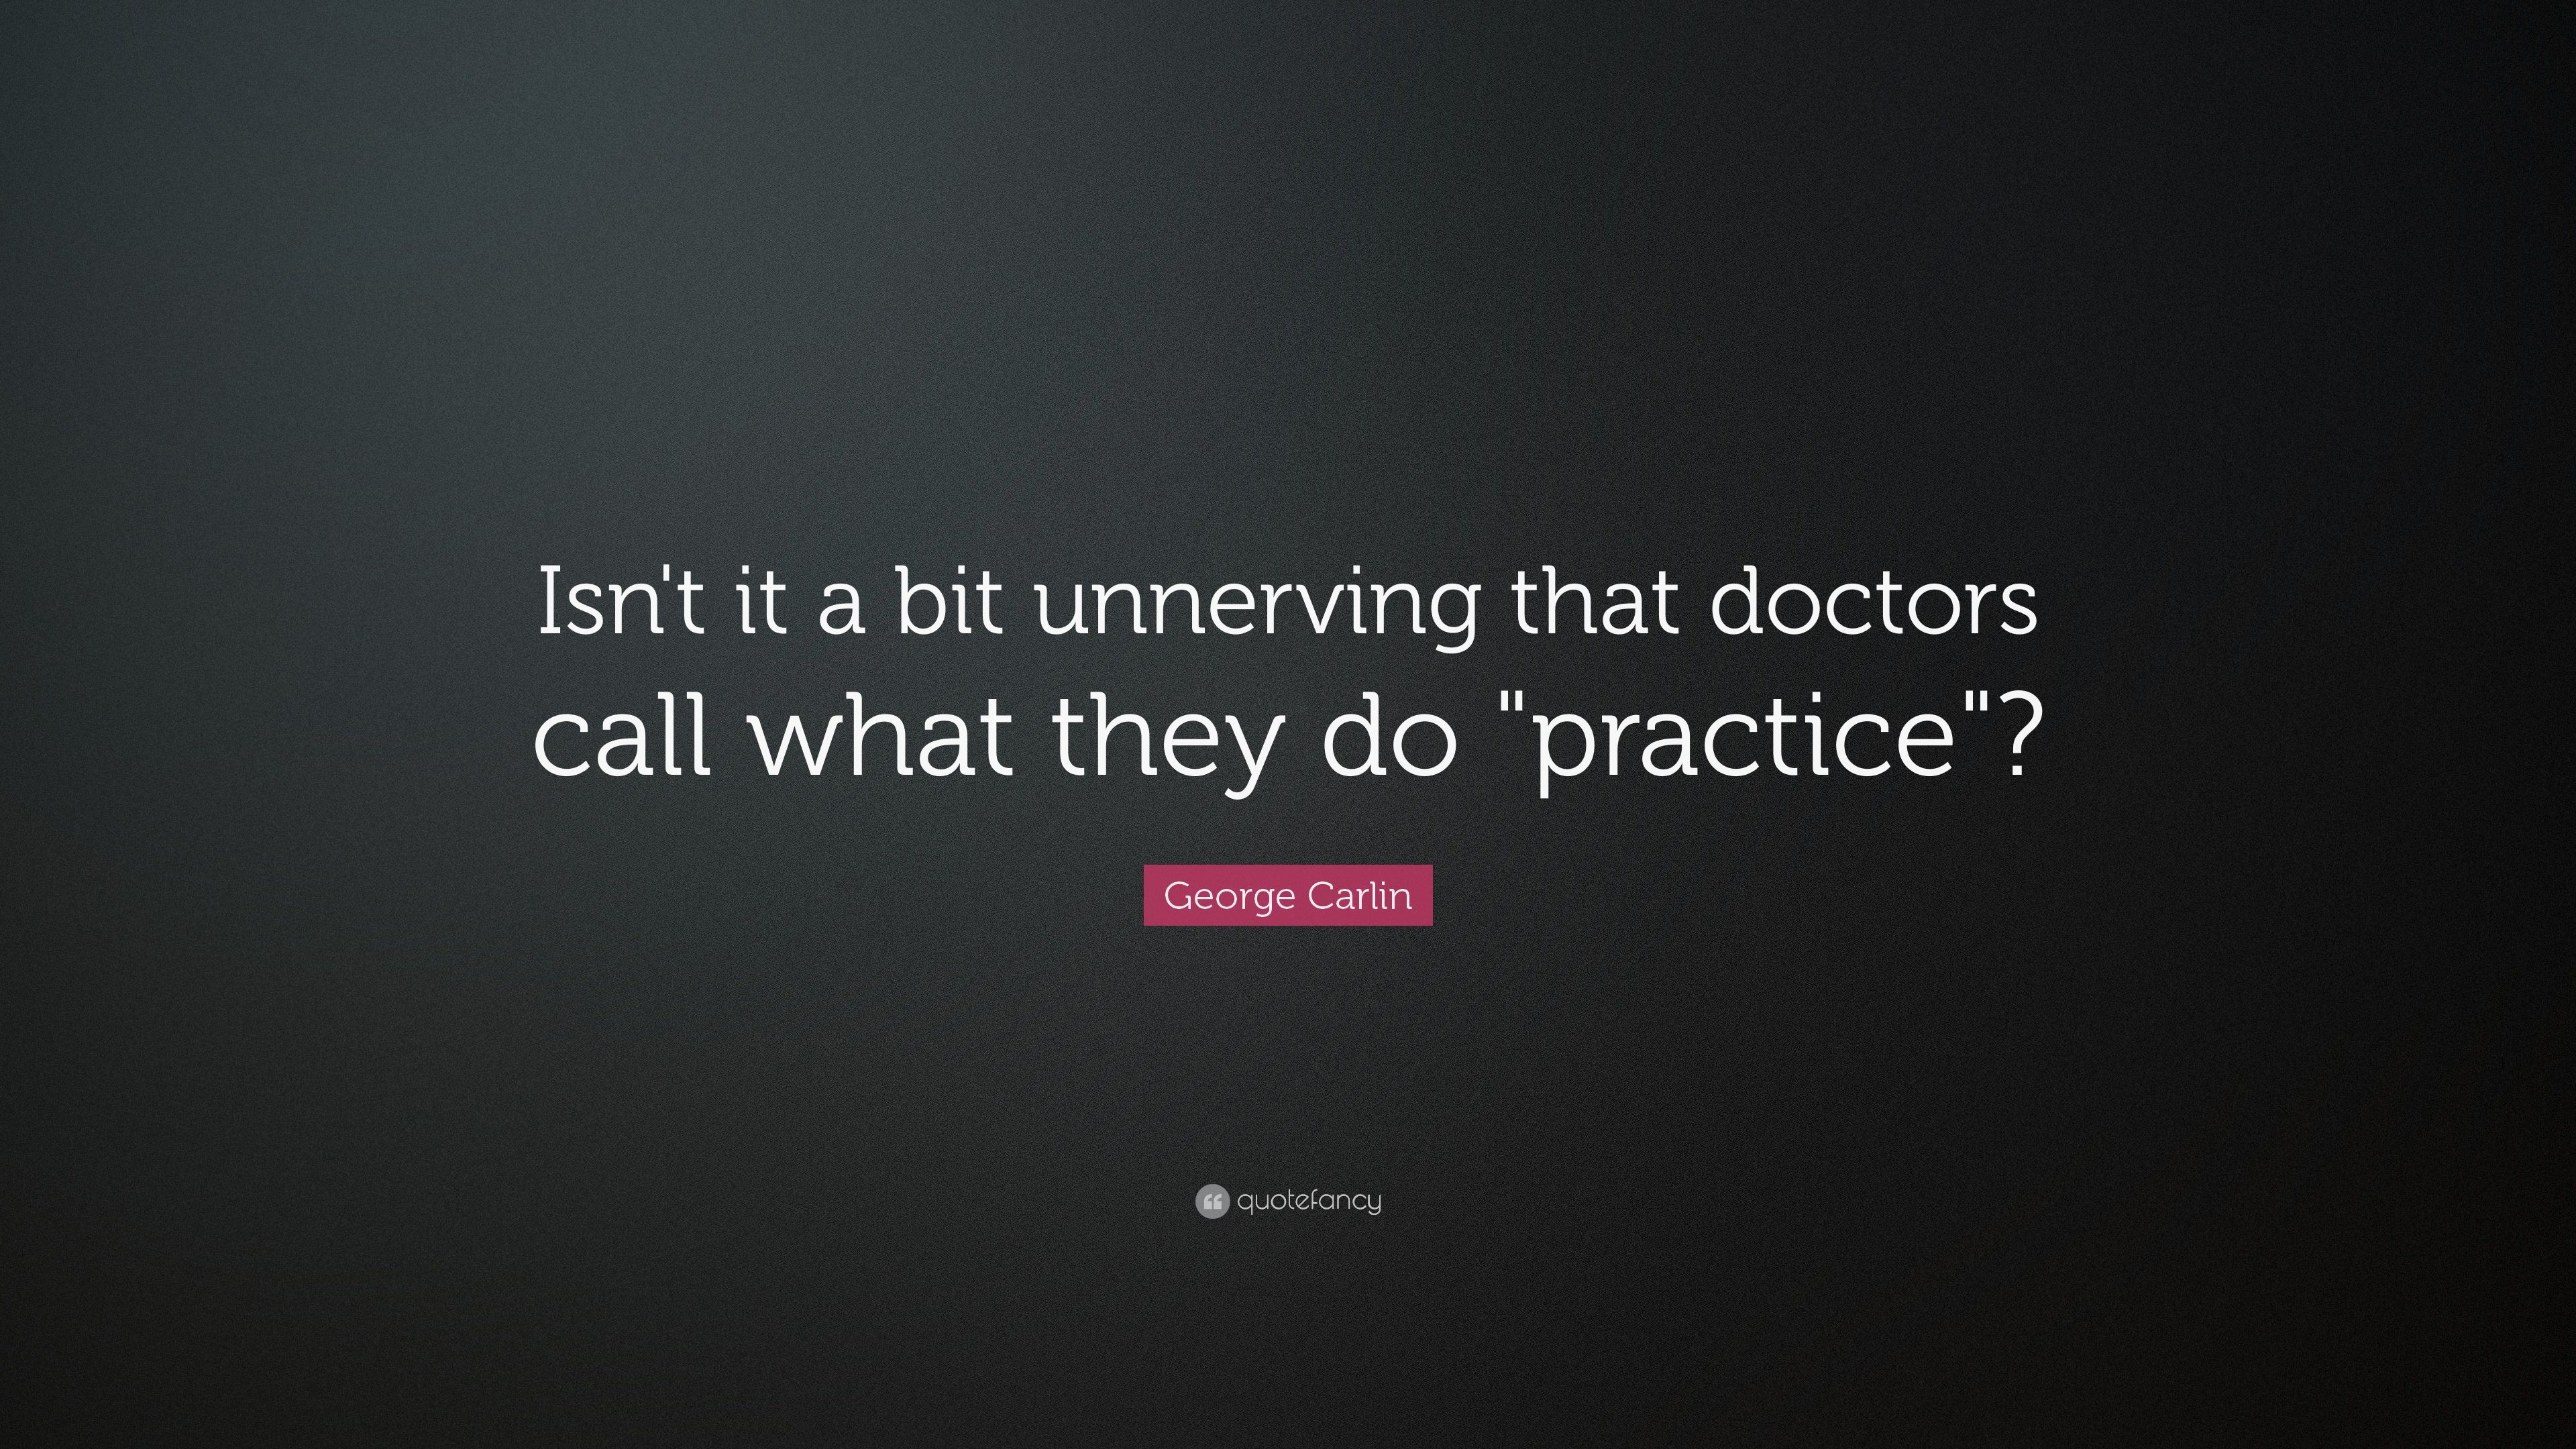 George Carlin Quote: “Isn't it a bit unnerving that doctors call